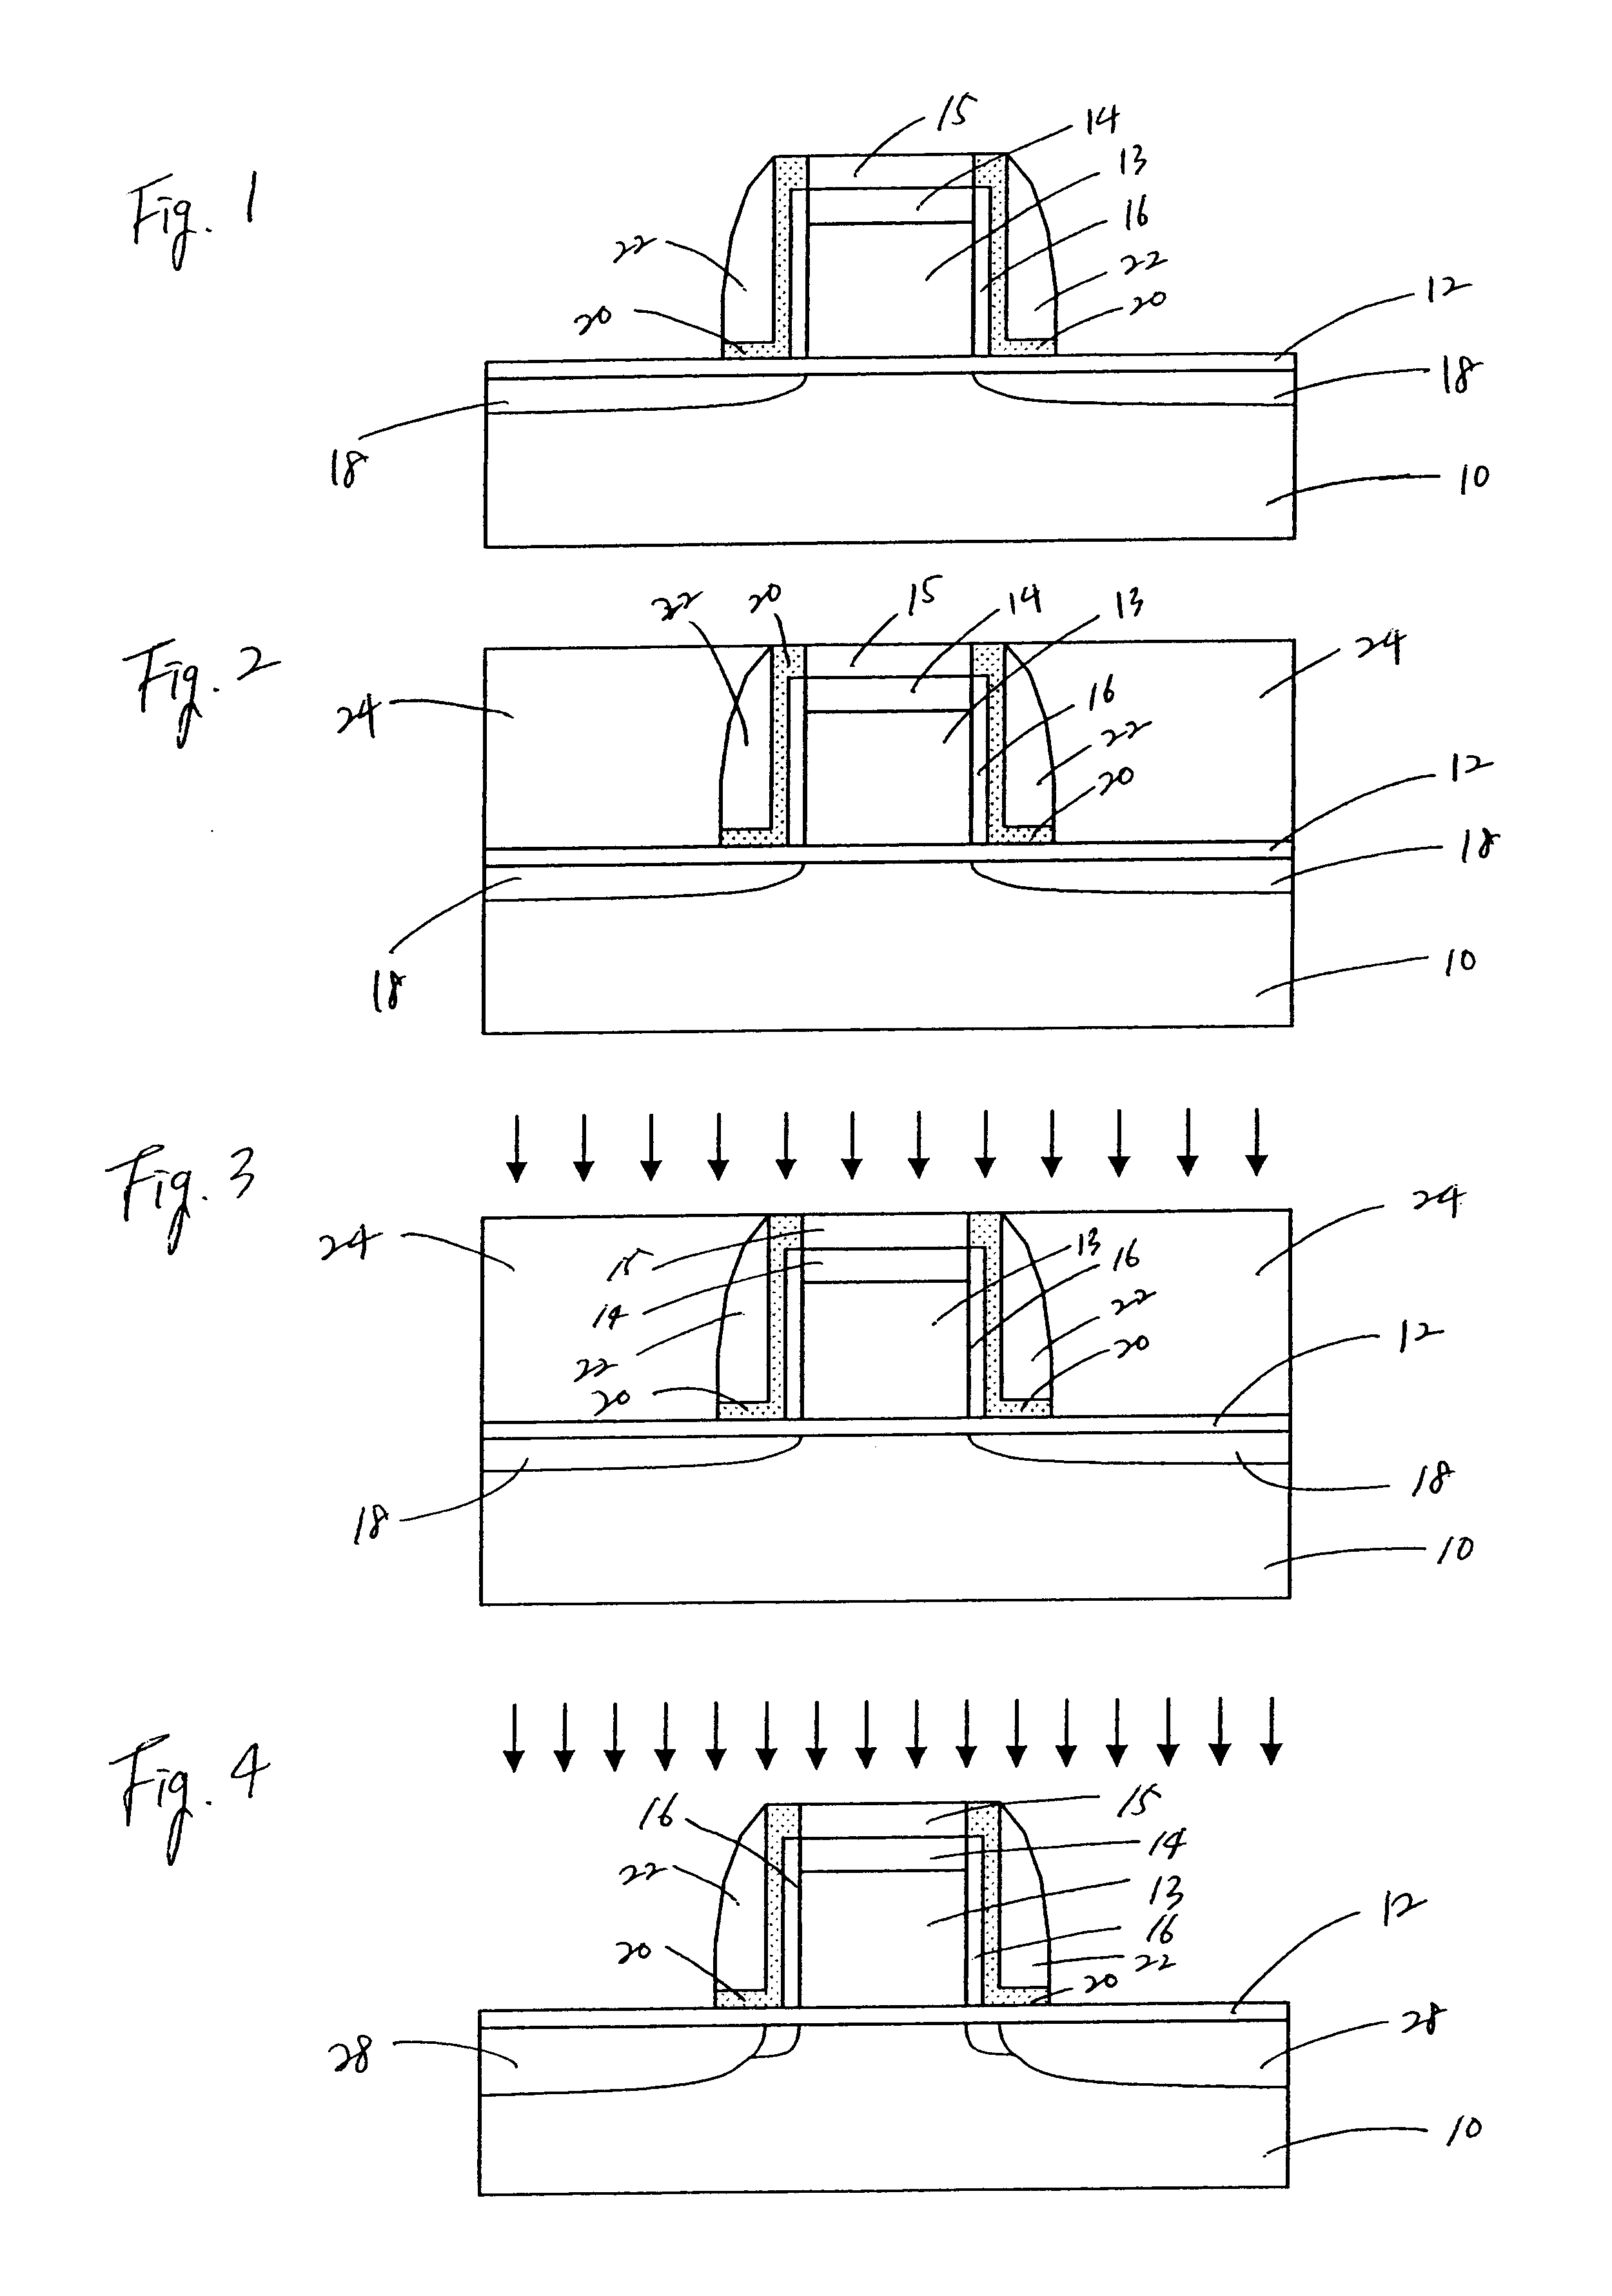 CMOS structure with maximized polysilicon gate activation and a method for selectively maximizing doping activation in gate, extension, and source/drain regions